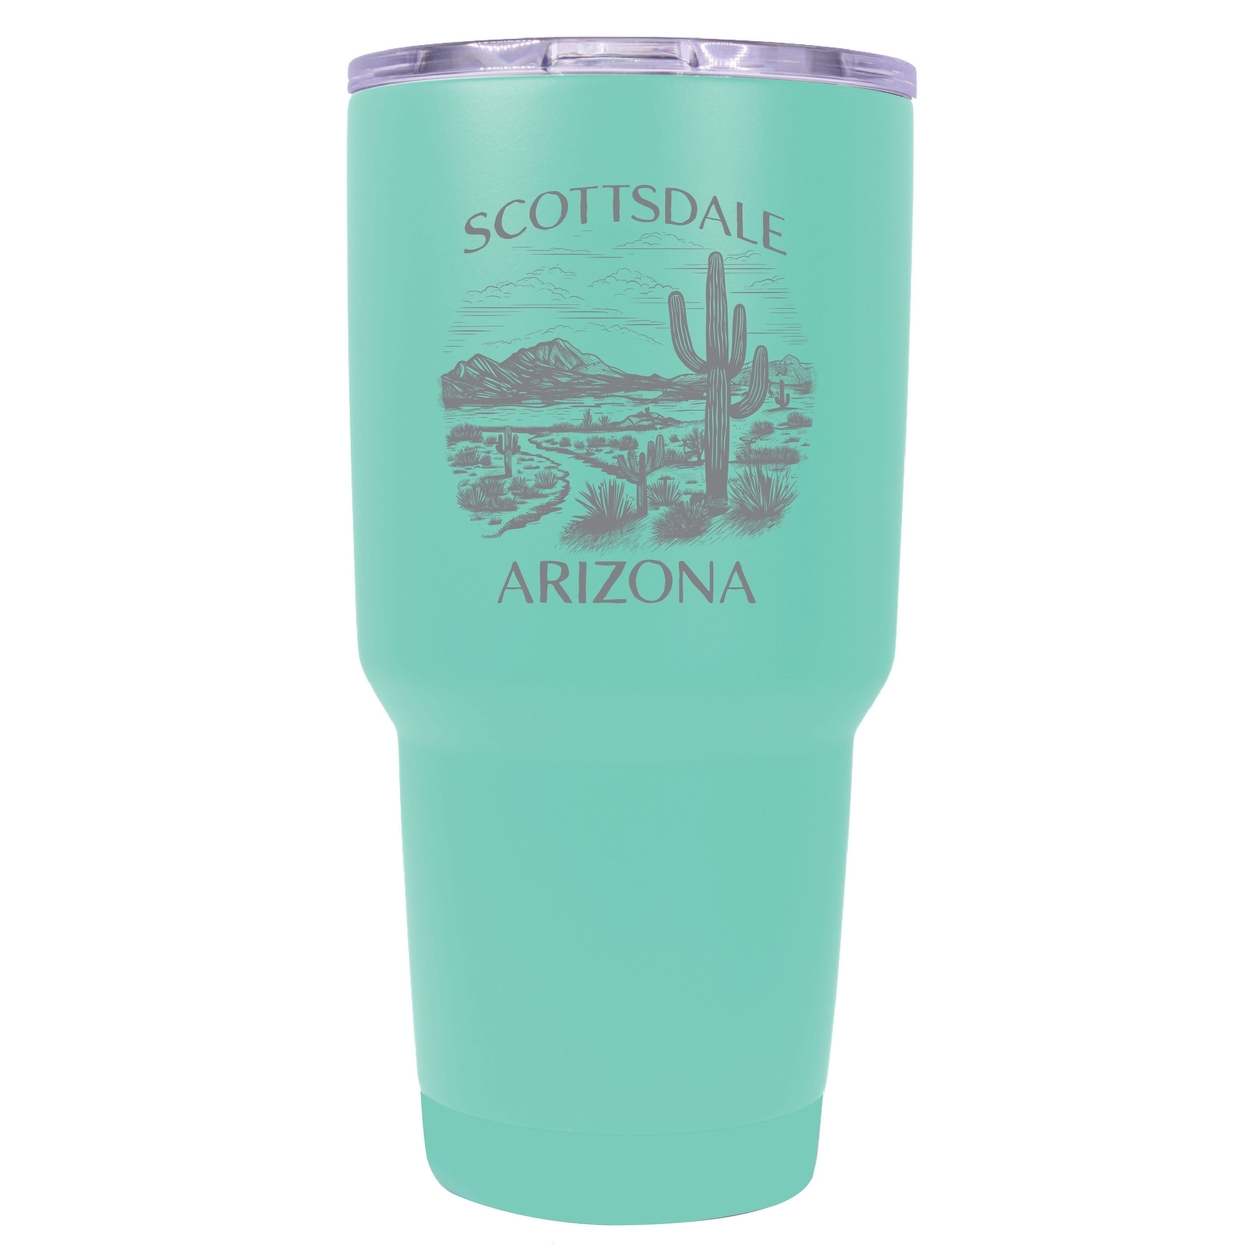 Scottsdale Arizona Souvenir 24 Oz Engraved Insulated Stainless Steel Tumbler - Red,,4-Pack